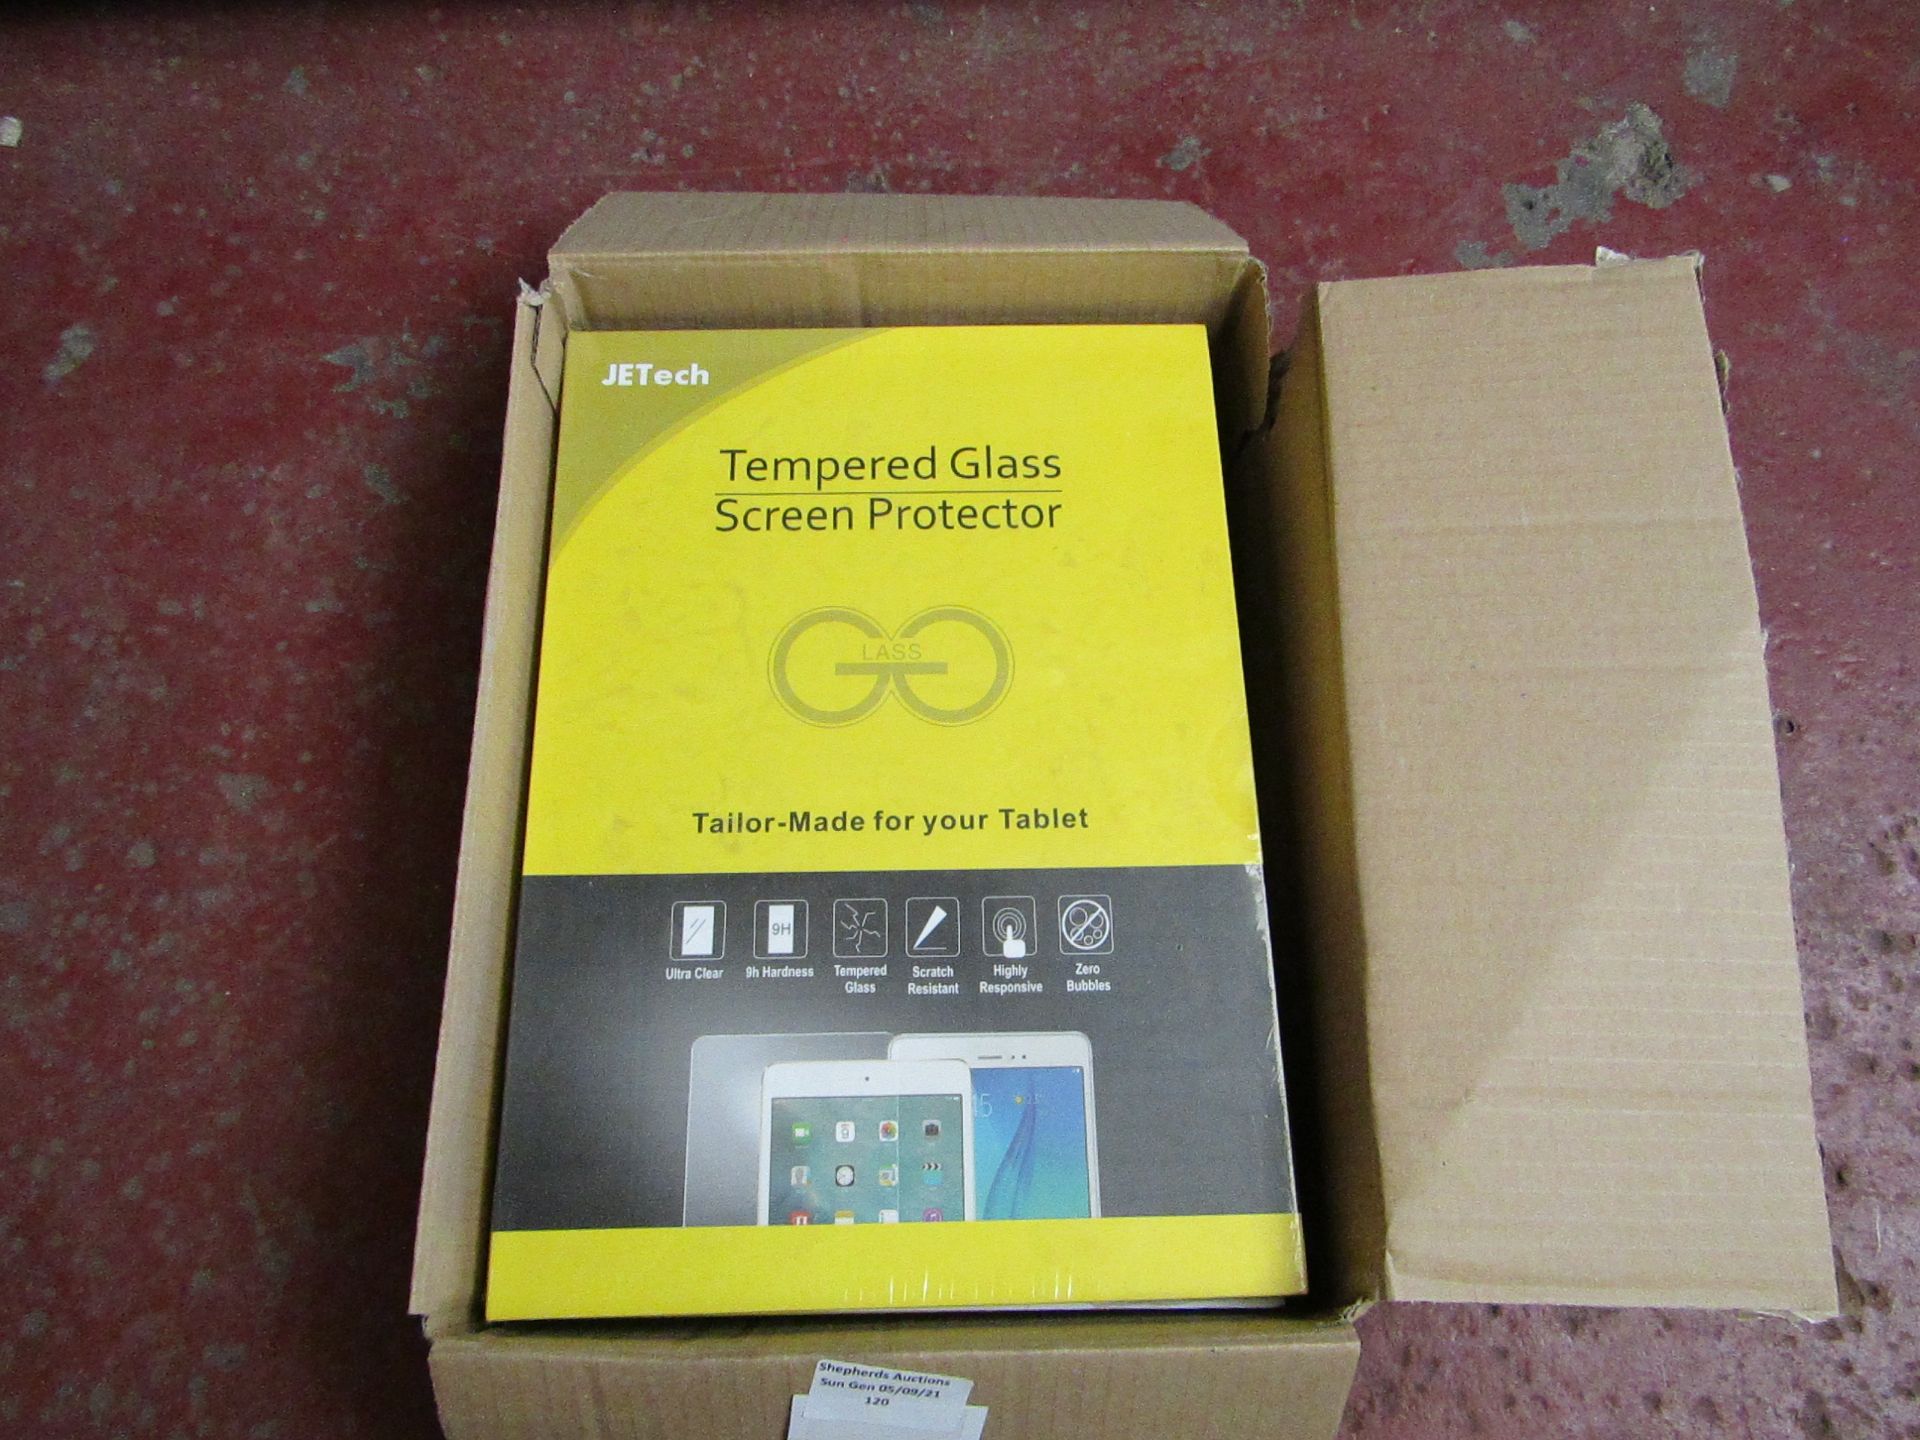 2x Jtech - Tempered Glass Screen Protector - Tailor Made for Your Tablet - New & Packaged.